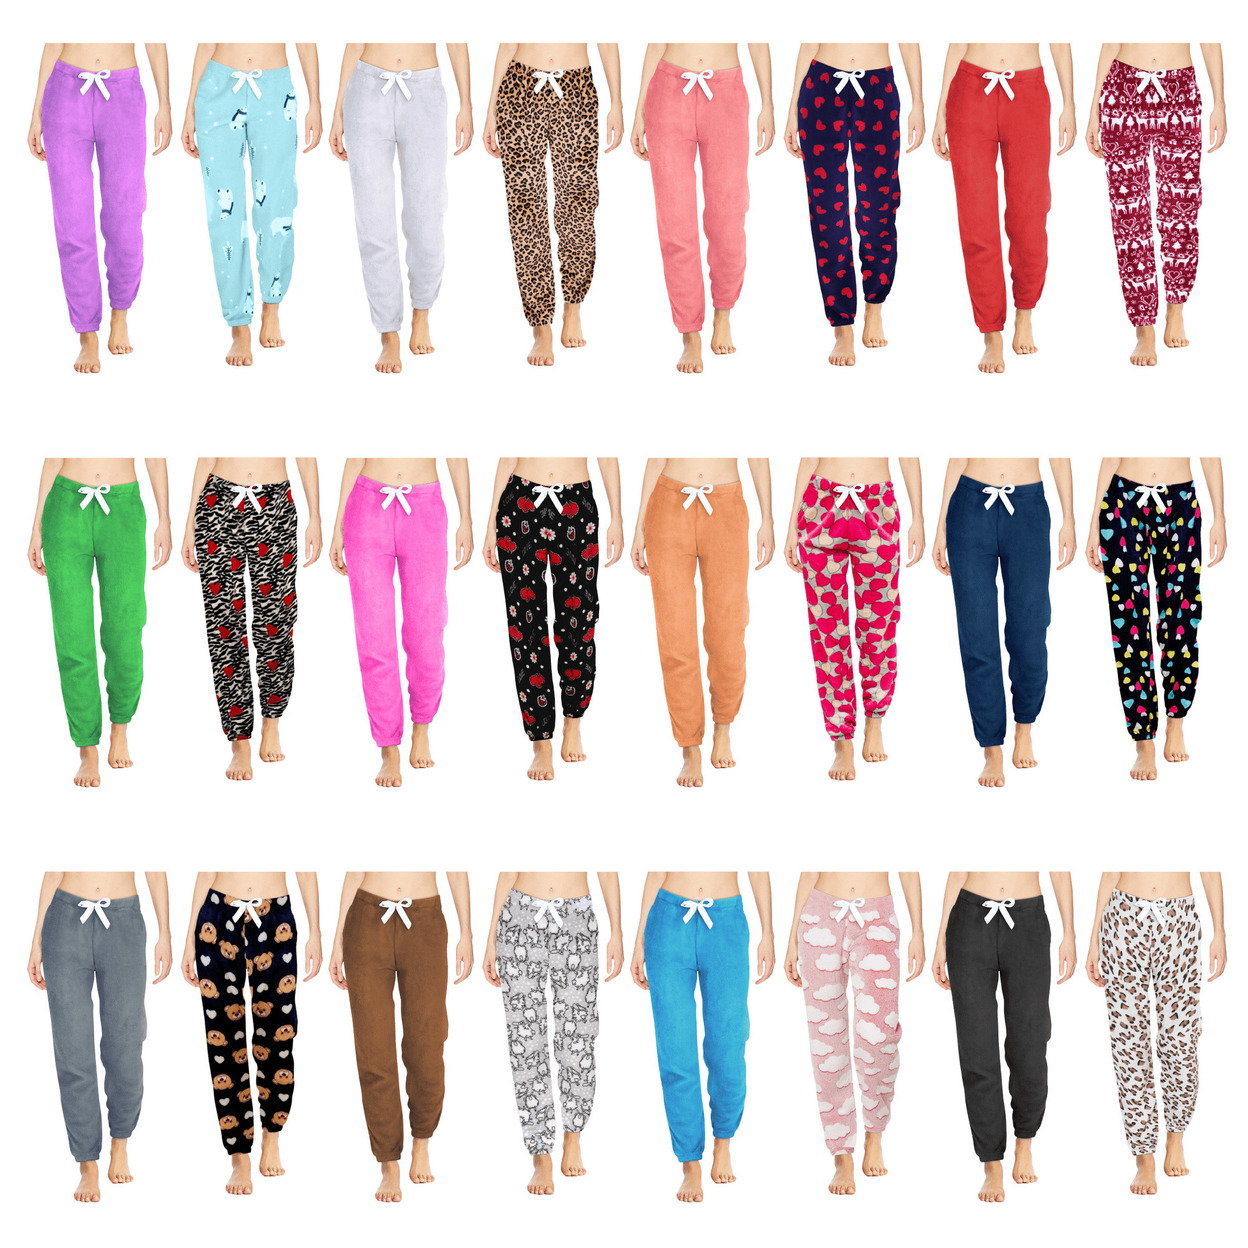 Multi-Pack: Women's Solid & Printed Ultra-Soft Comfy Stretch Micro-Fleece Pajama Lounge Pants - 3-pack, Medium, Love